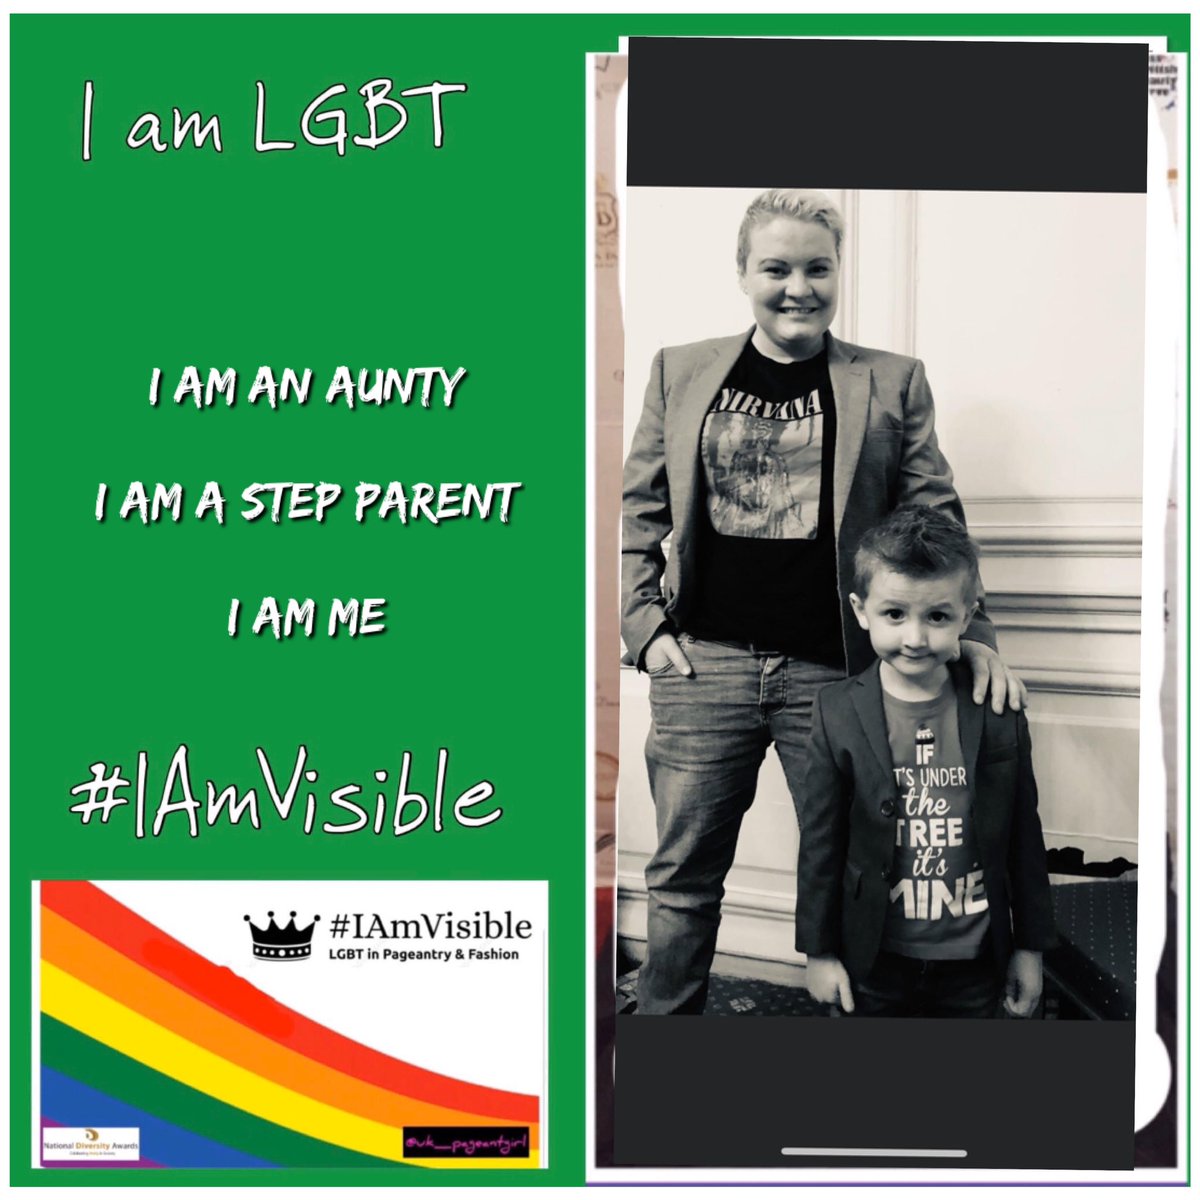 Please help make a difference in the Fashion and Pageantry industries!! 
Come join #IAmVisible by becoming visible yourself and posting a picture of you (as a LGBT individual or LGBT supporter) saying 3 things about you and the hashtag #IAmVisible